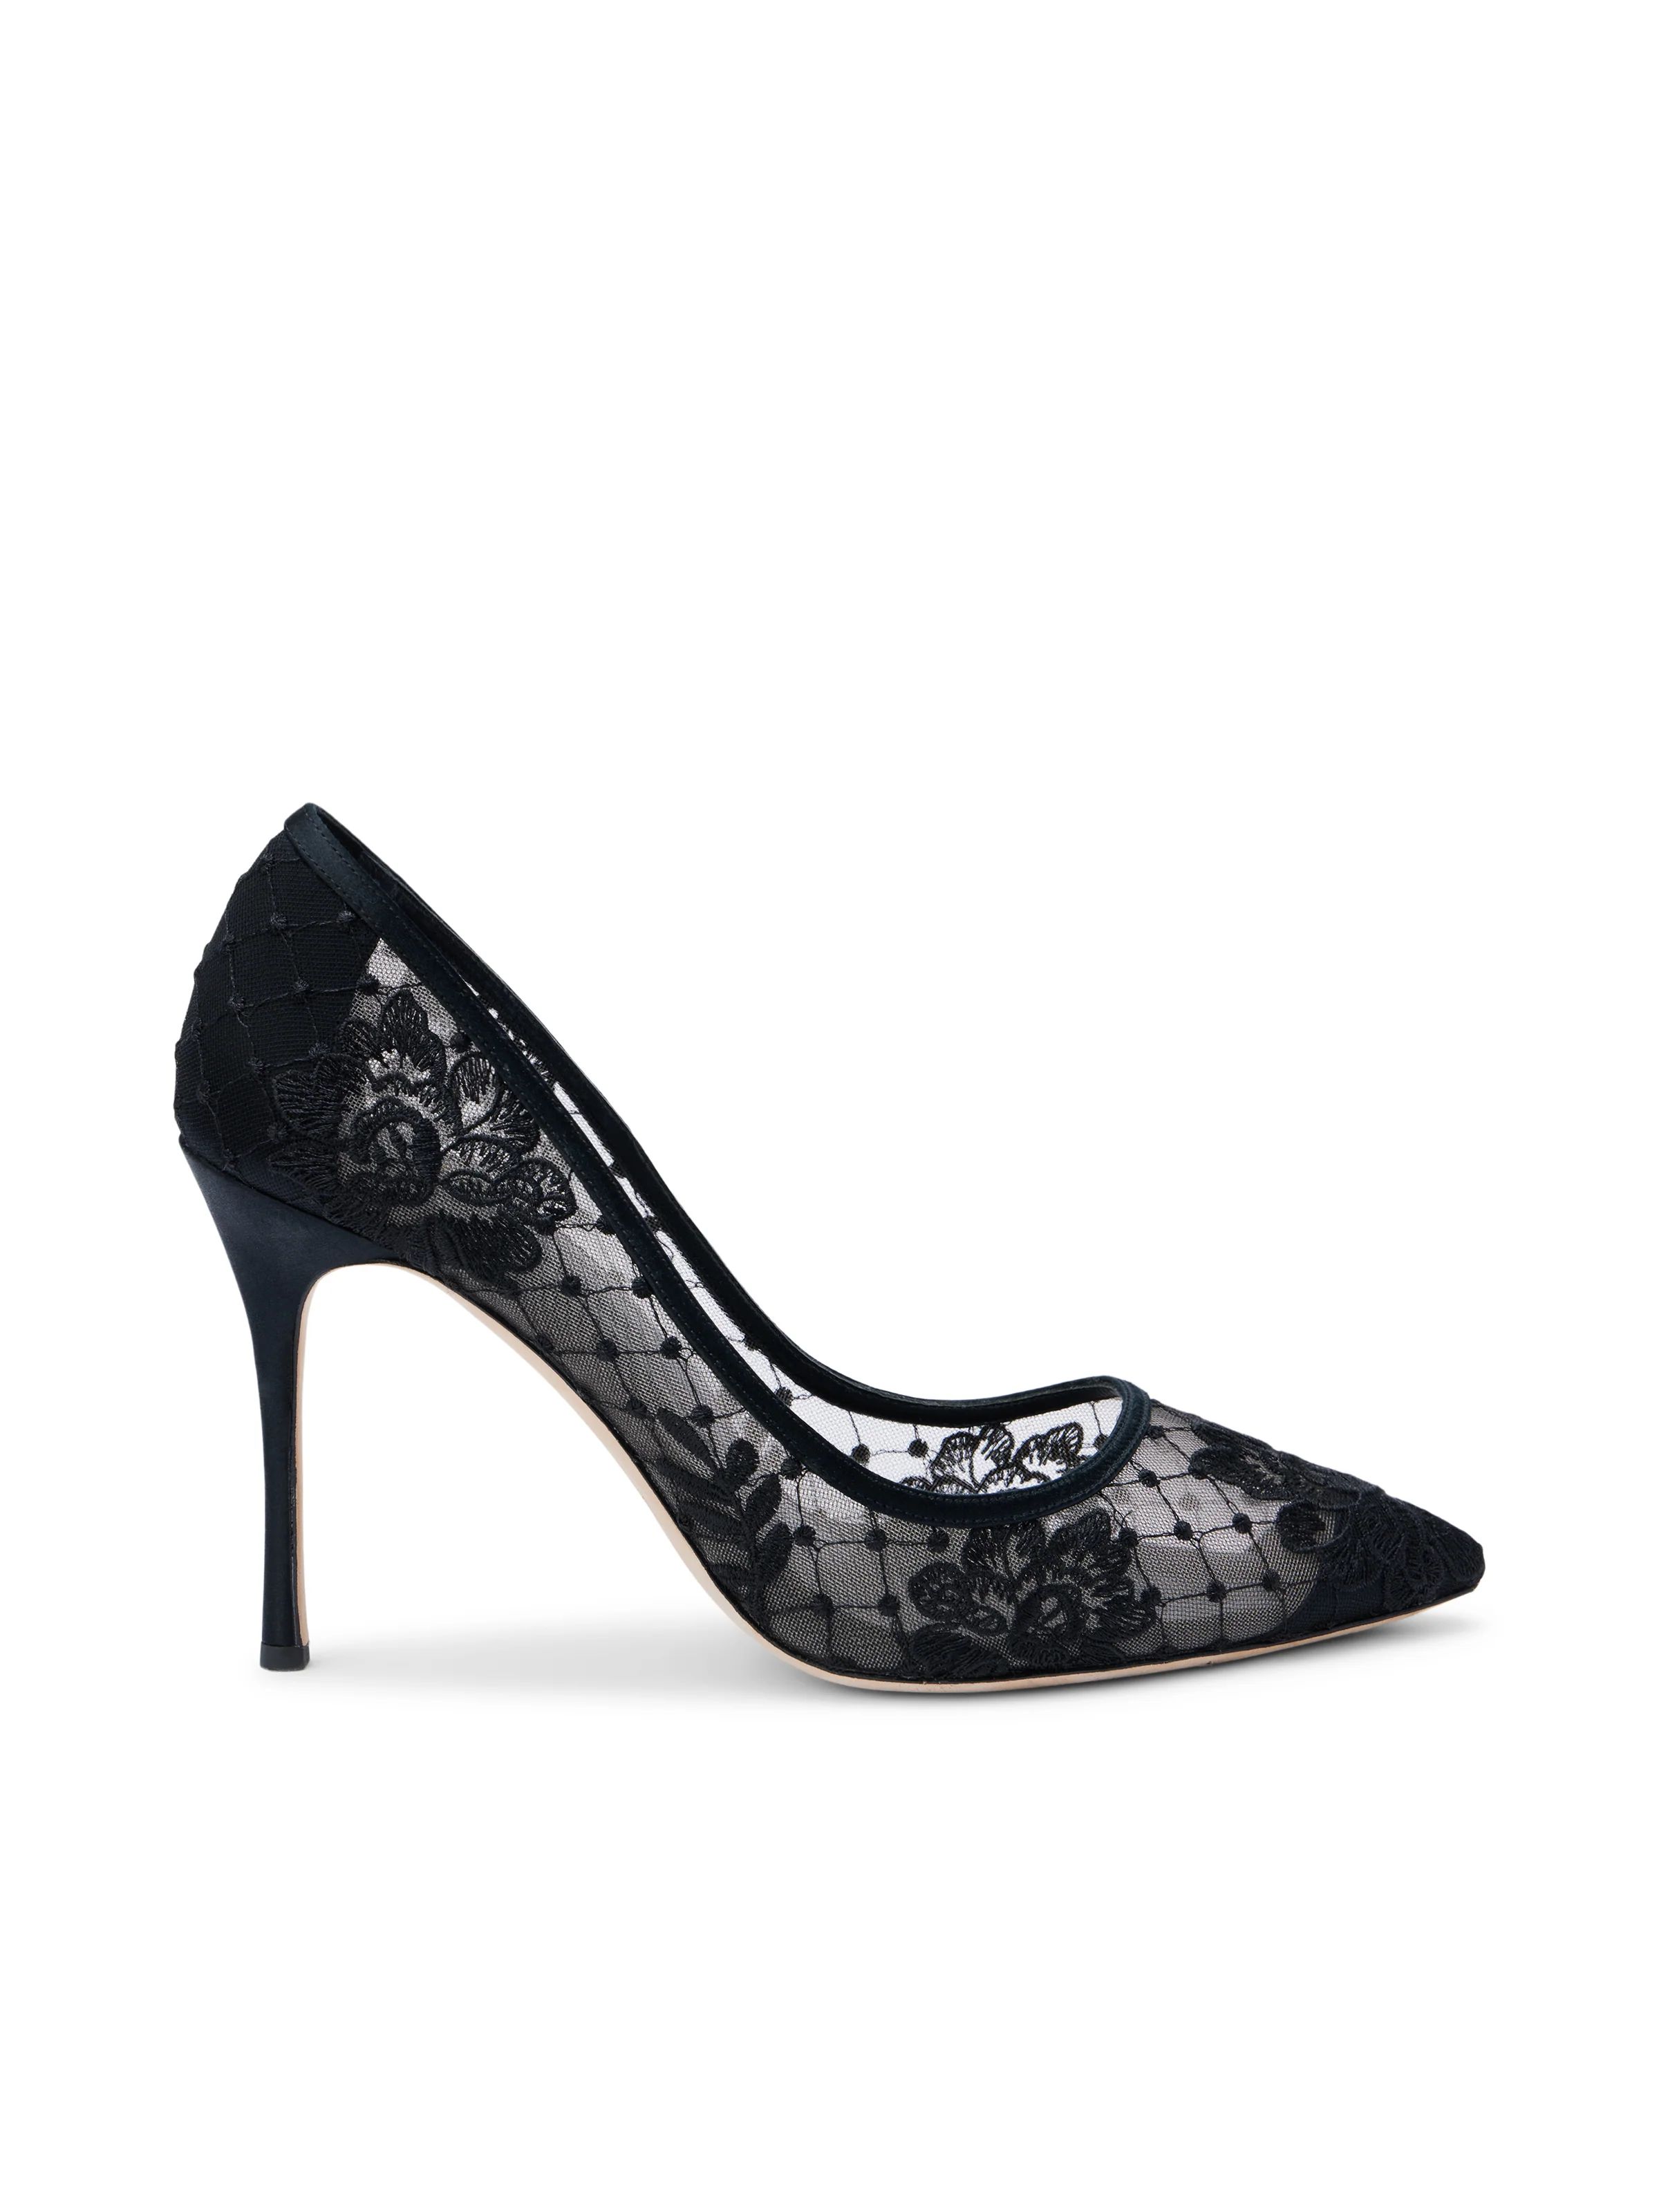 L'AGENCE Anais Pump in Black Lace/Satin | L'Agence